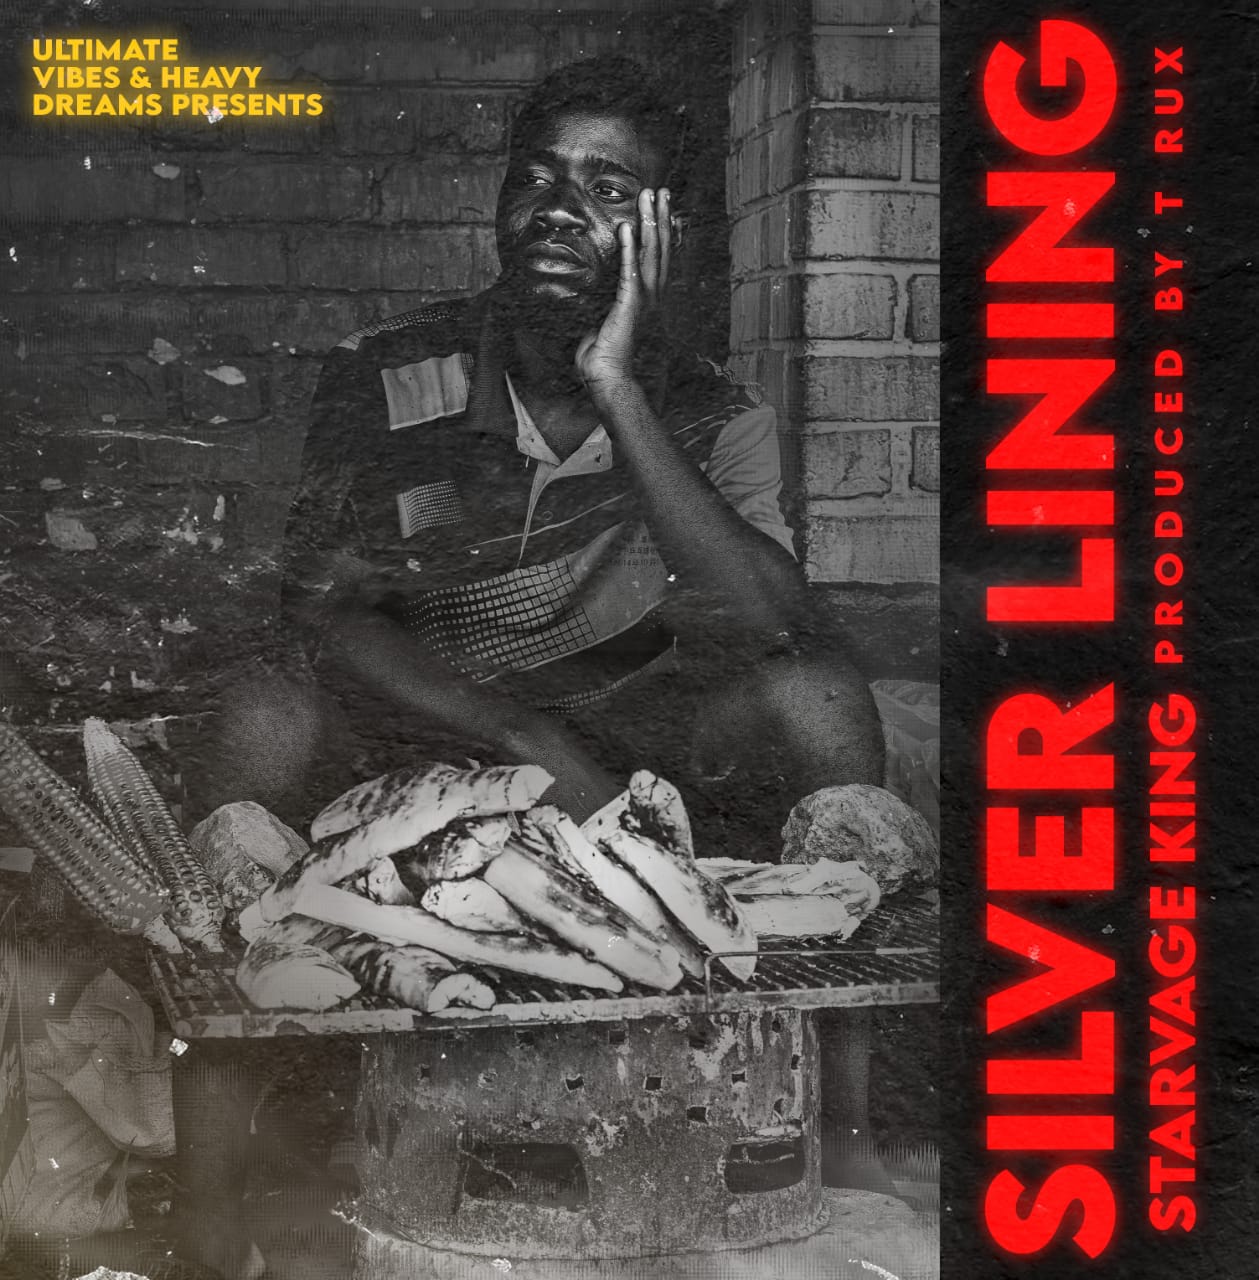 Starvage king - Silver Lining Mp3 Download